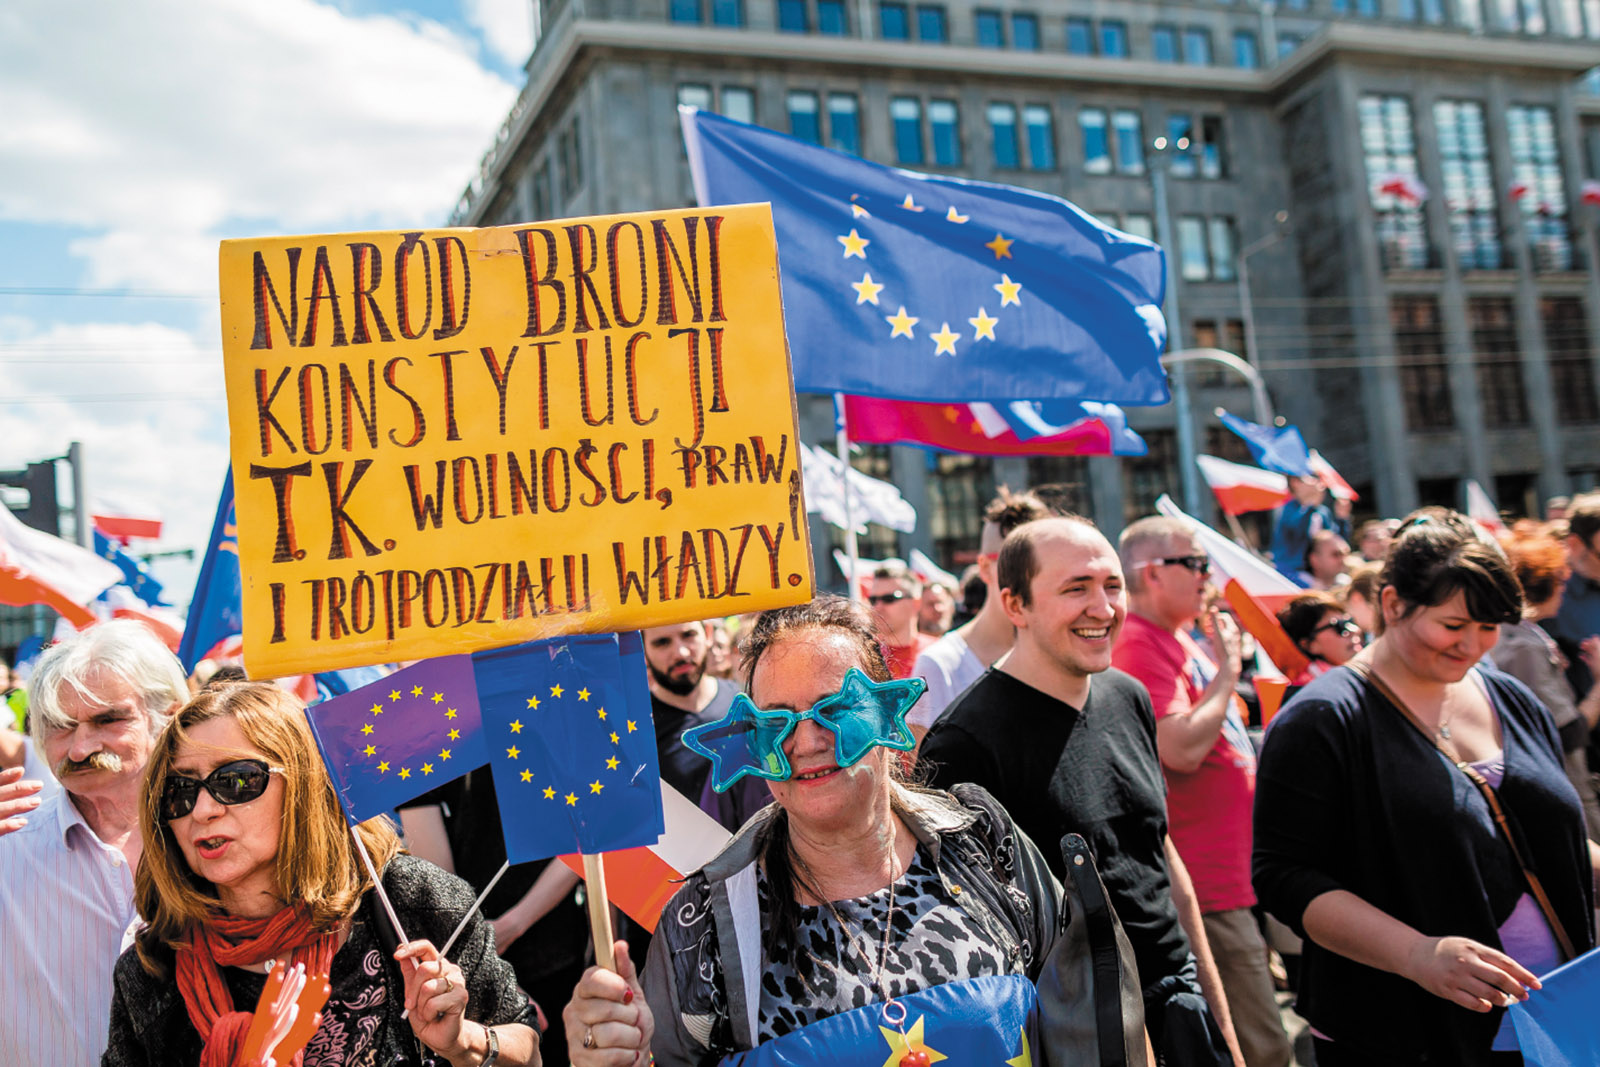 Pro-EU protesters at a demonstration against Poland’s right-wing government, Warsaw, May 2016. The sign says, ‘The people defend the Constitution as well as freedom, laws, and the threefold form of government.’